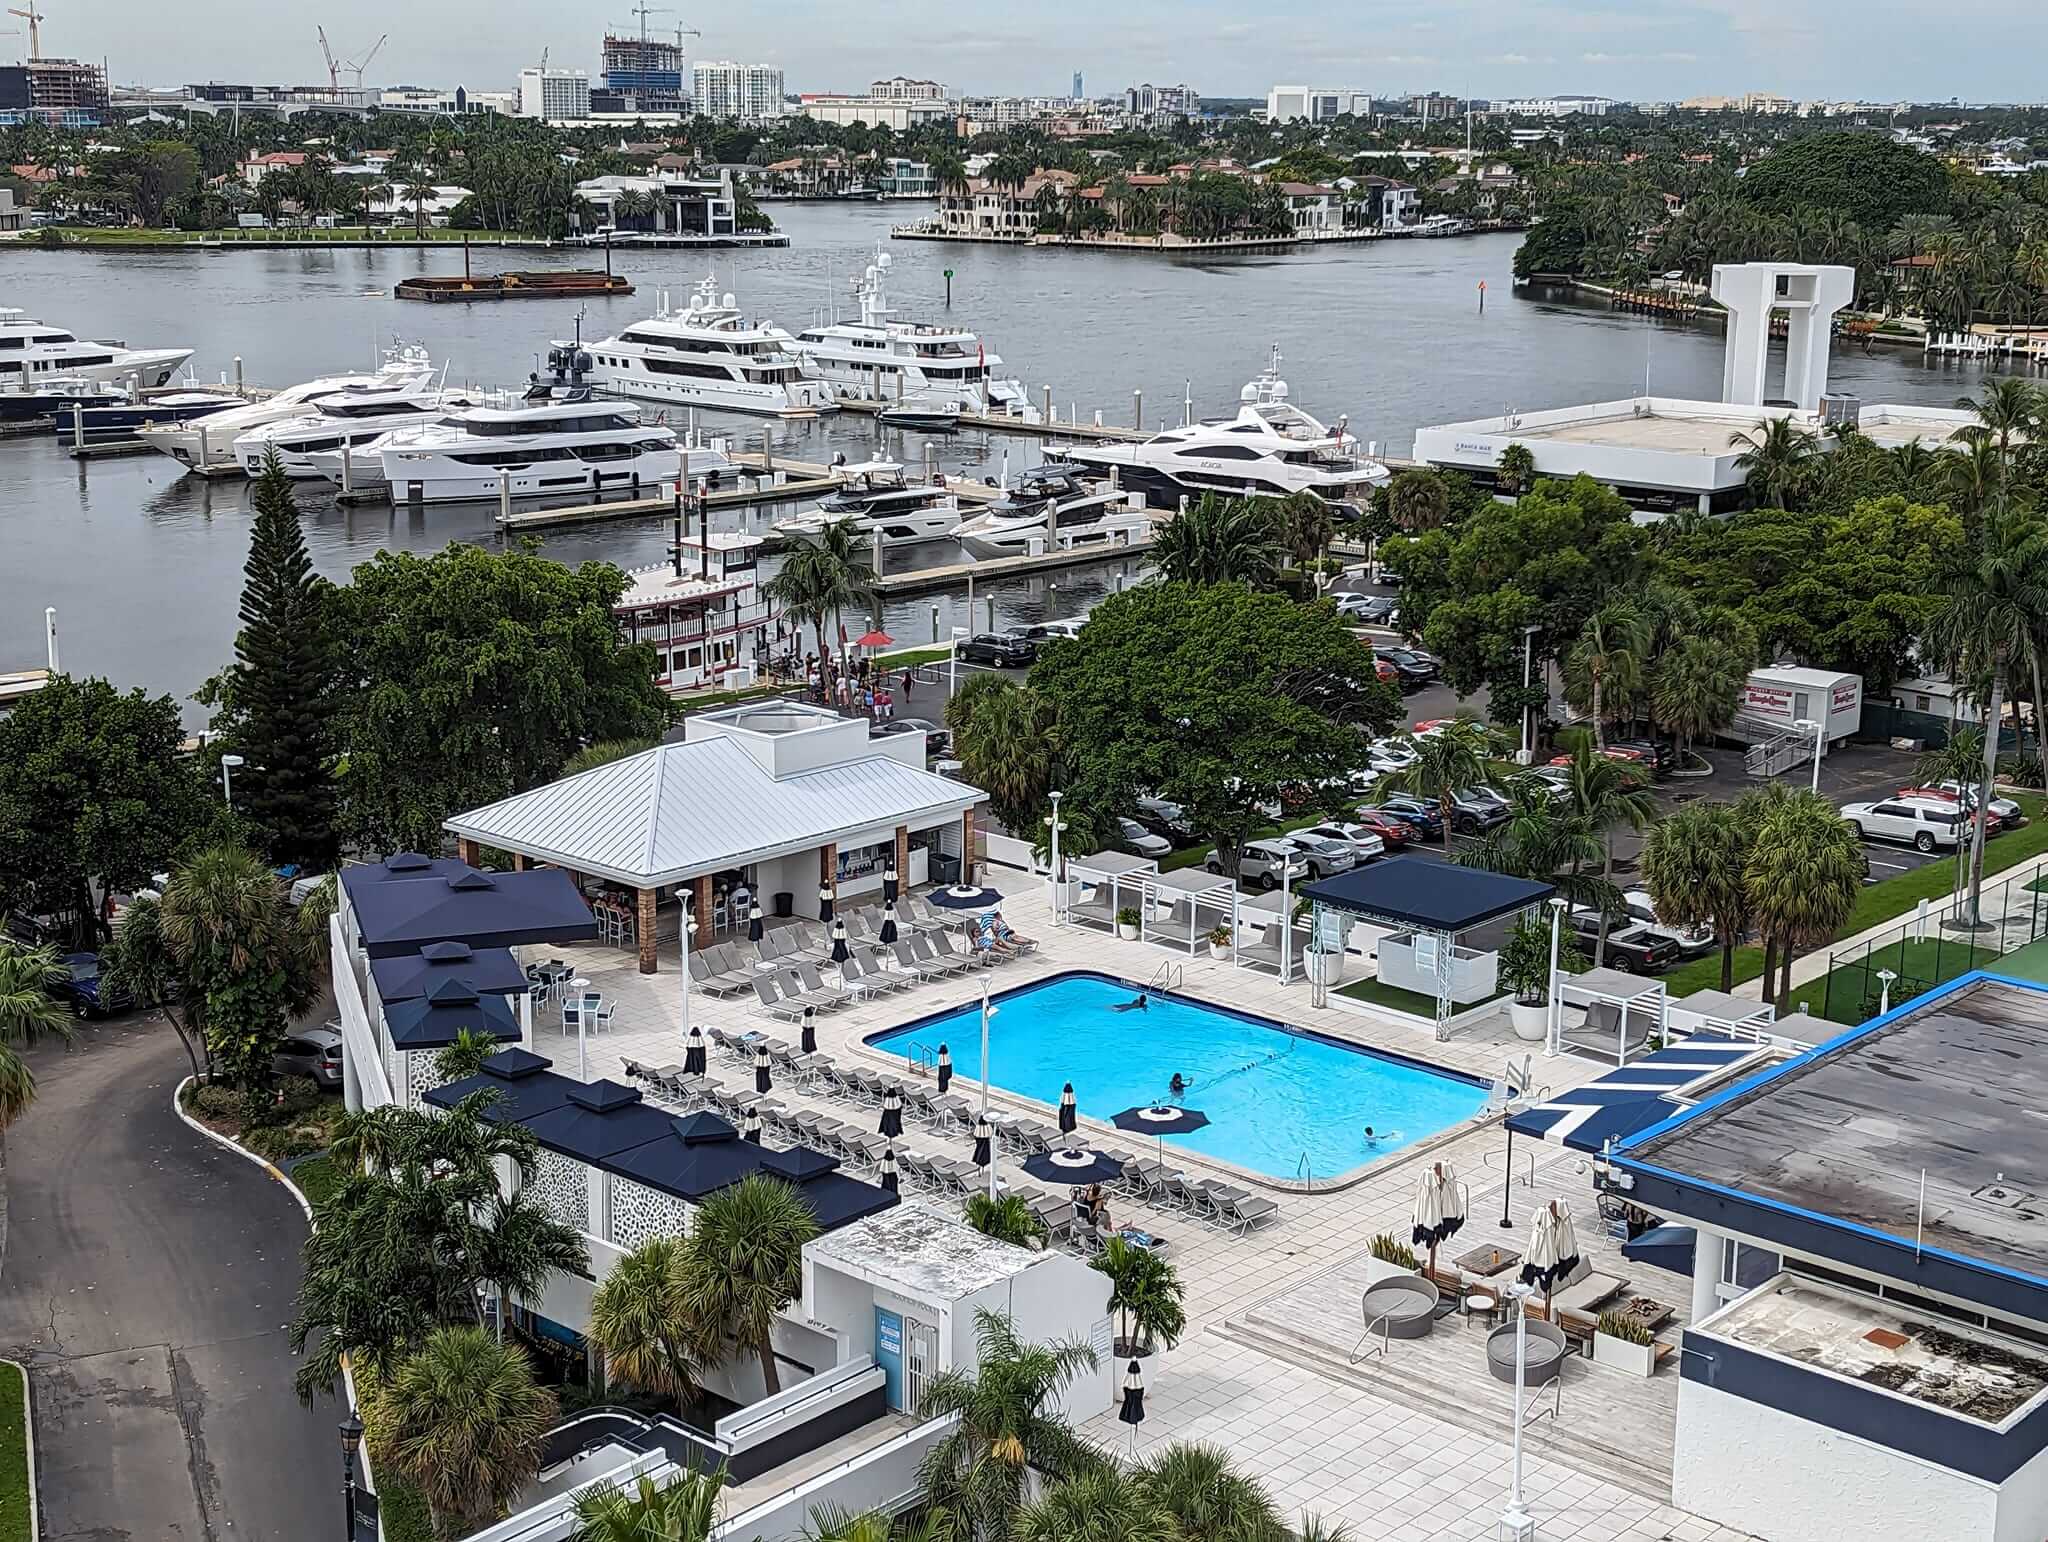 Rooftop pool and bar at the Bahia Mar Double Tree Hotel in Fort Lauderdale